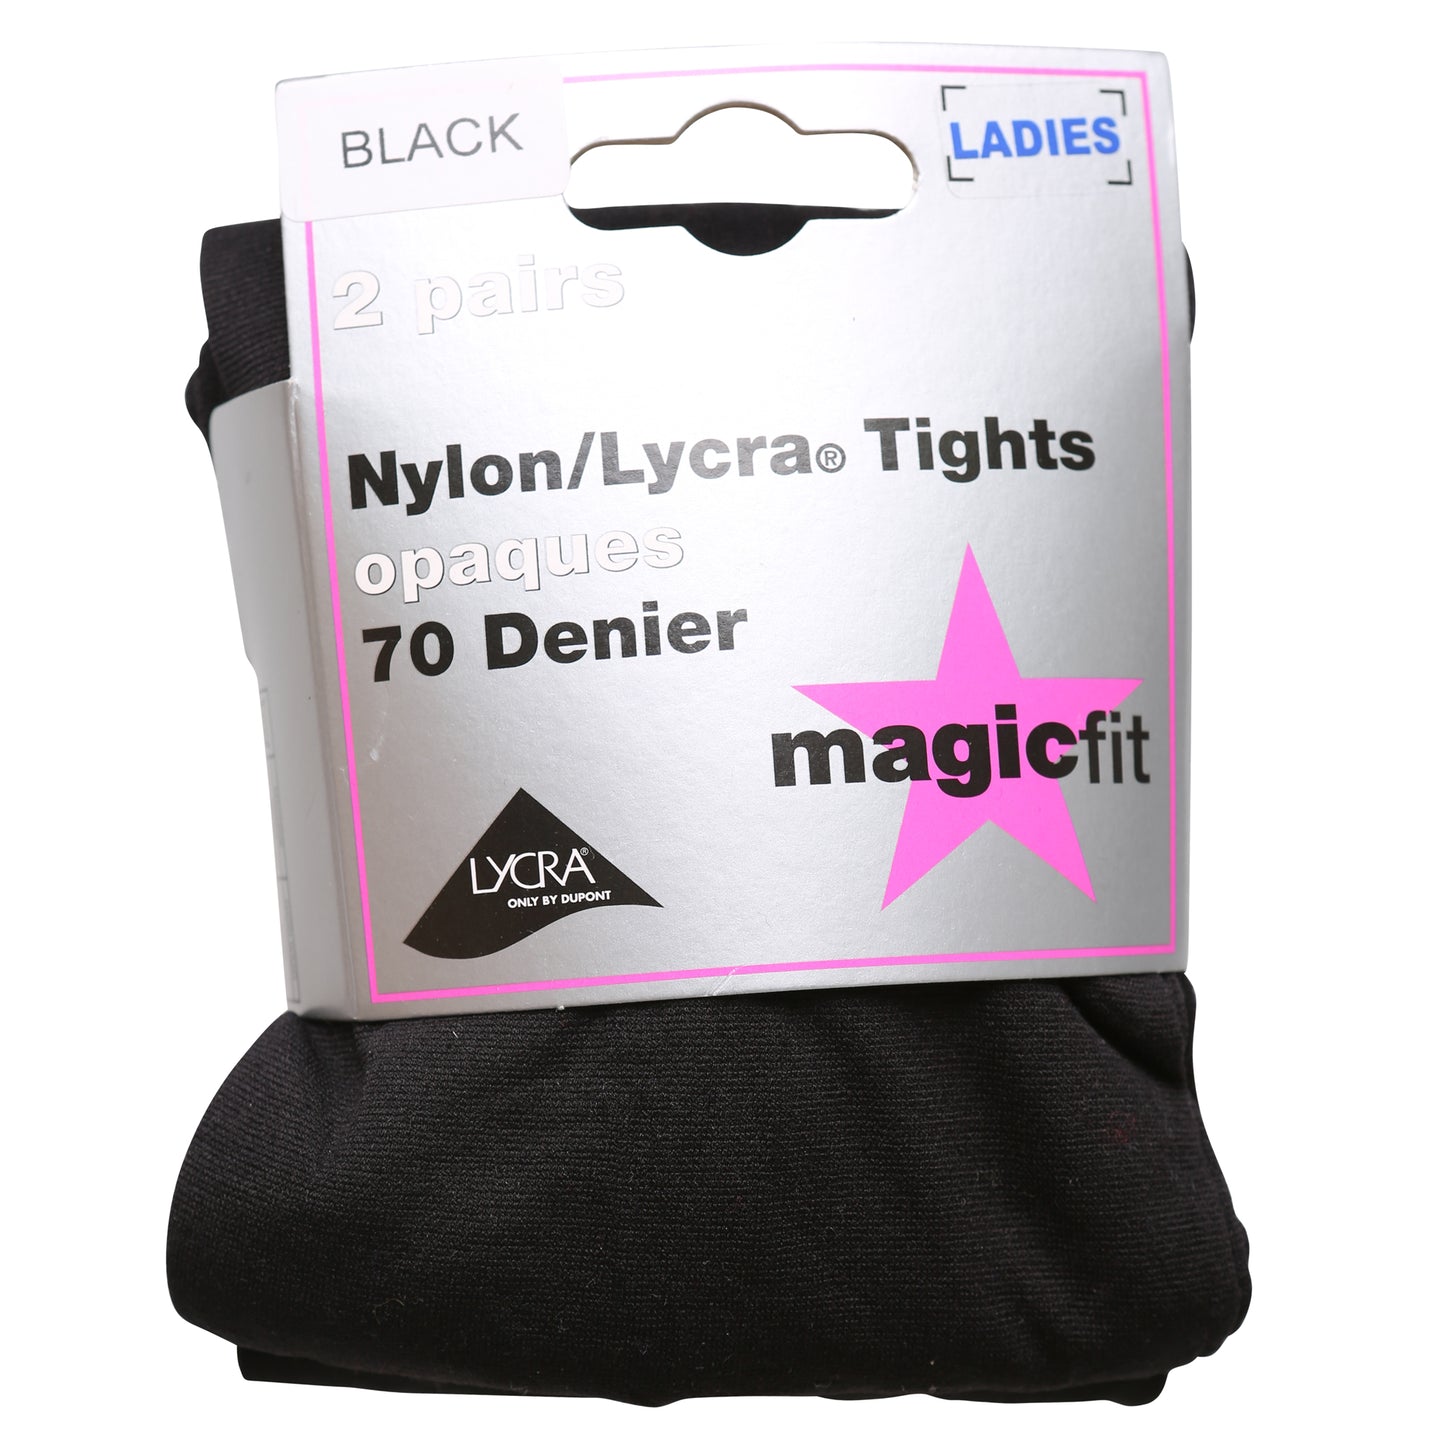 Ladies Black Opaque Tights (Twin Pack)